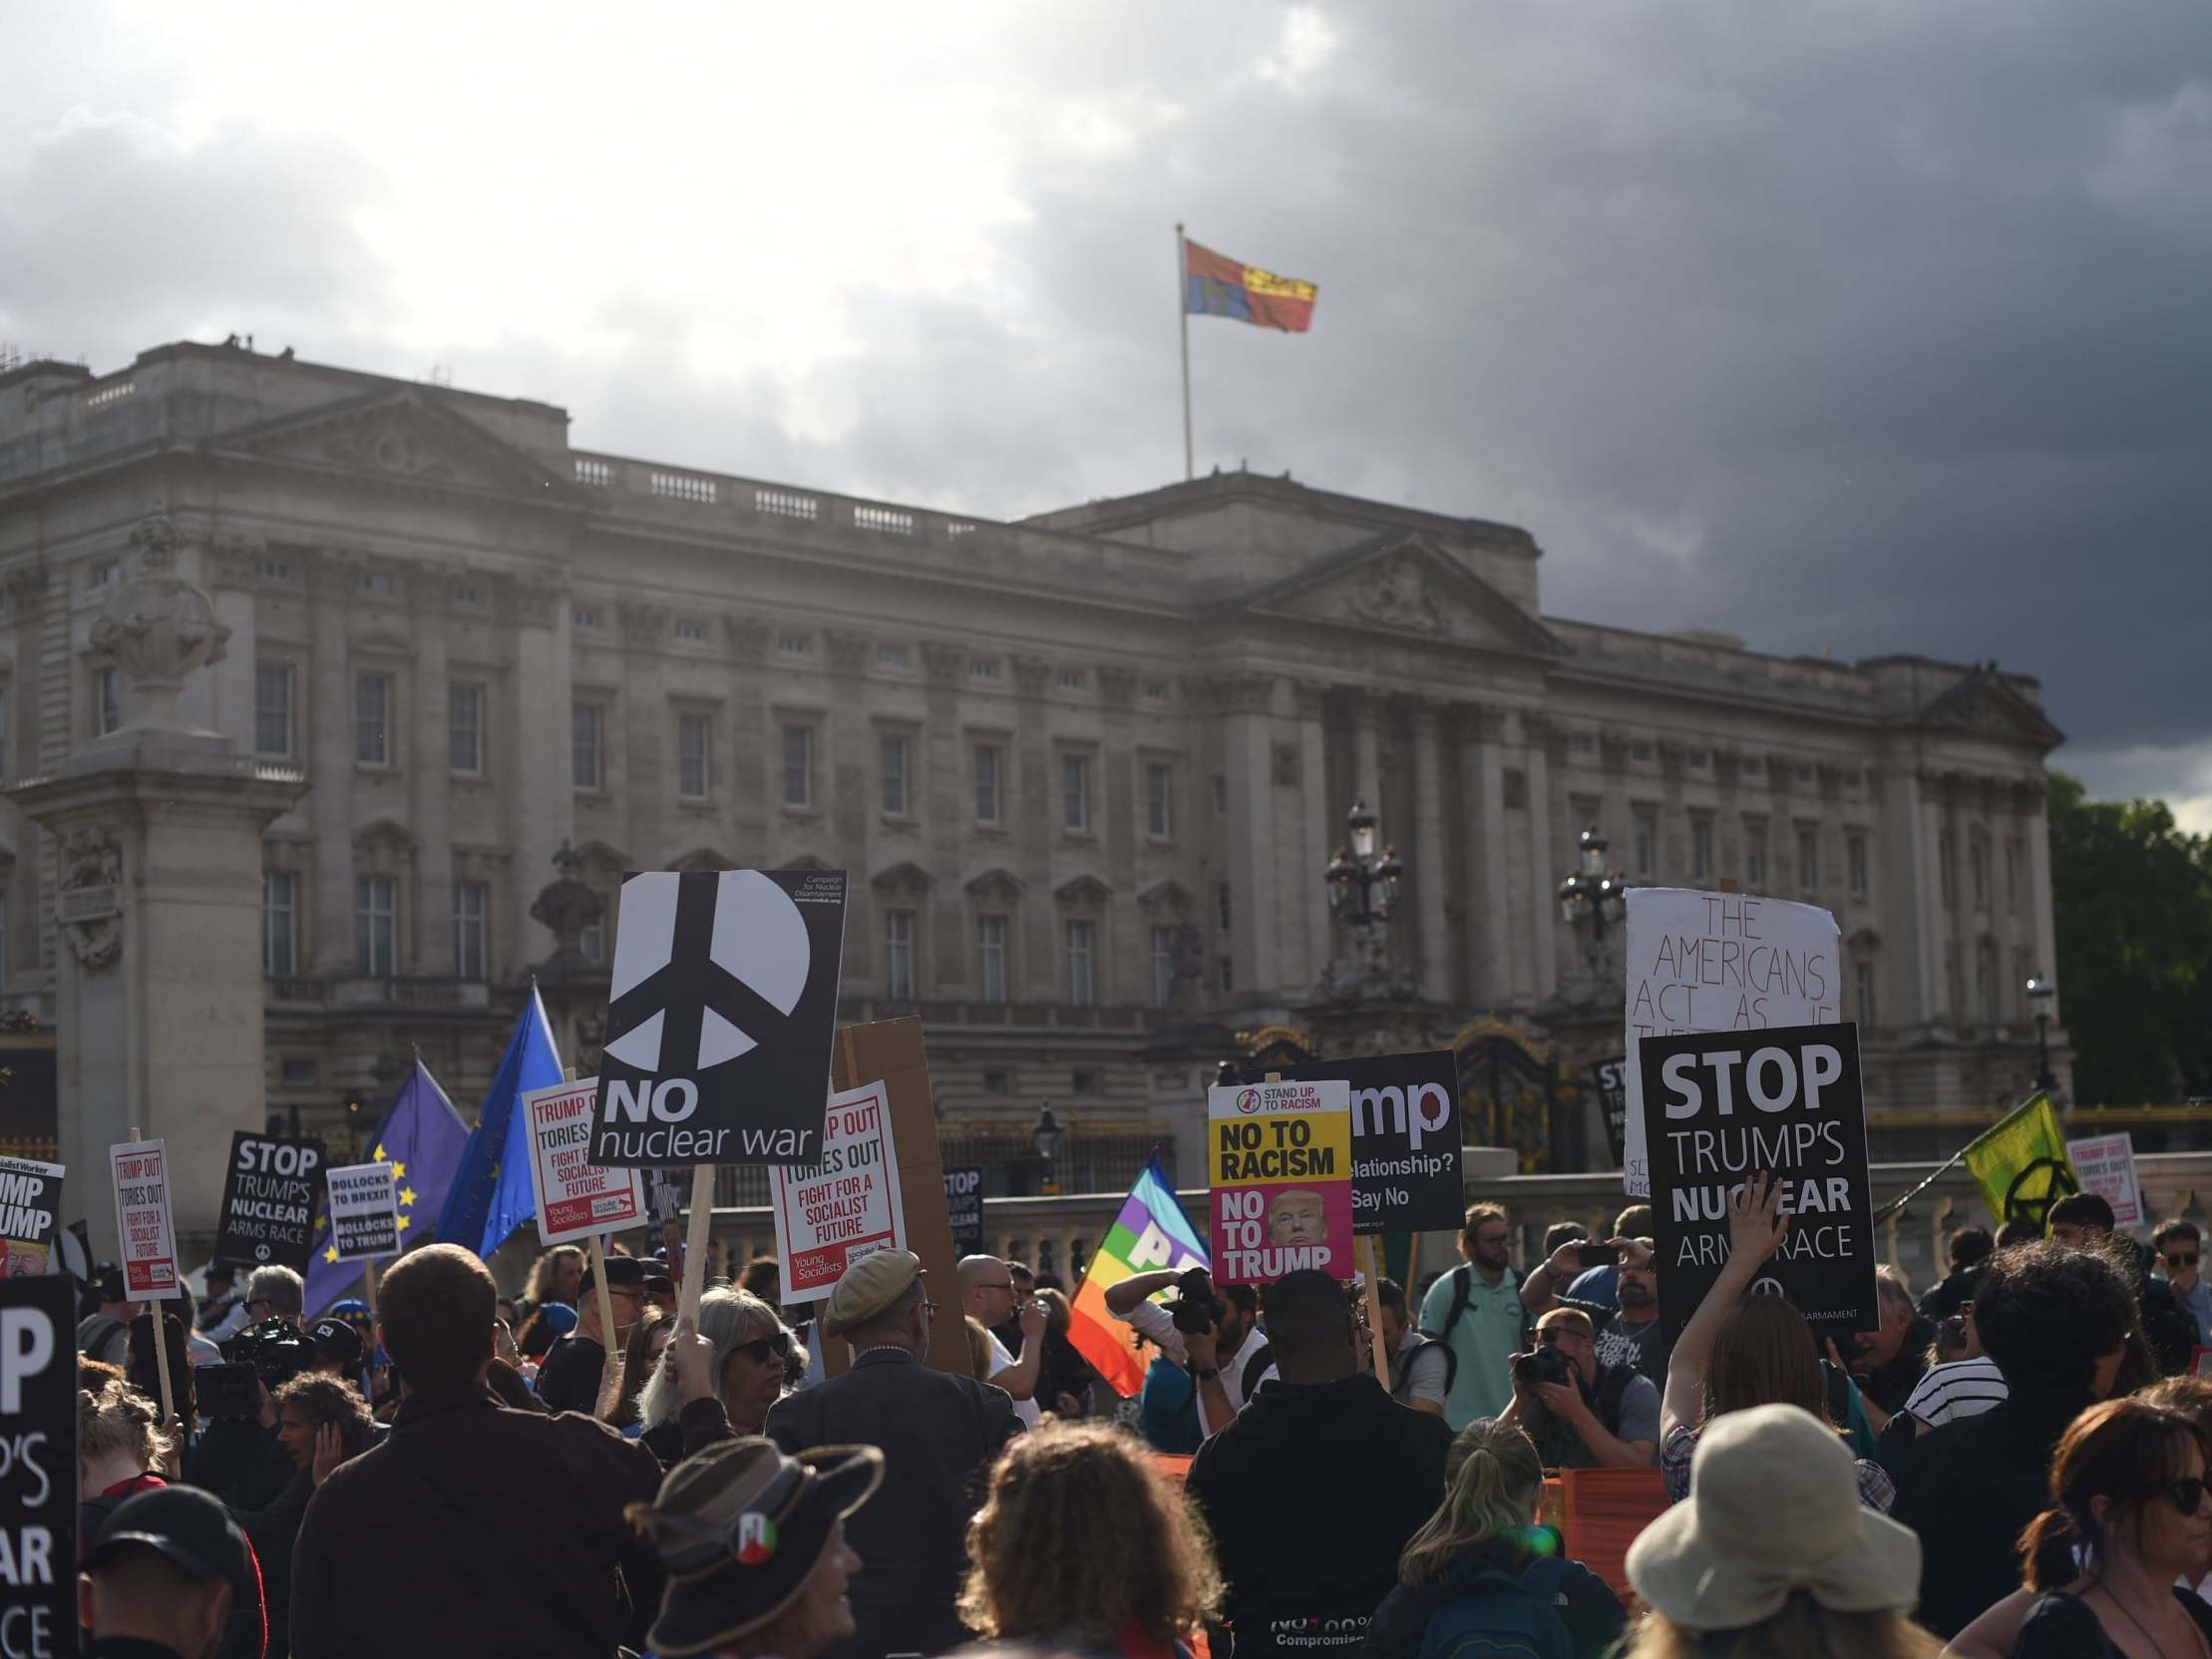 Protest outside Buckingham Palace, London, during the first day of a state visit to the UK by US president Donald Trump.